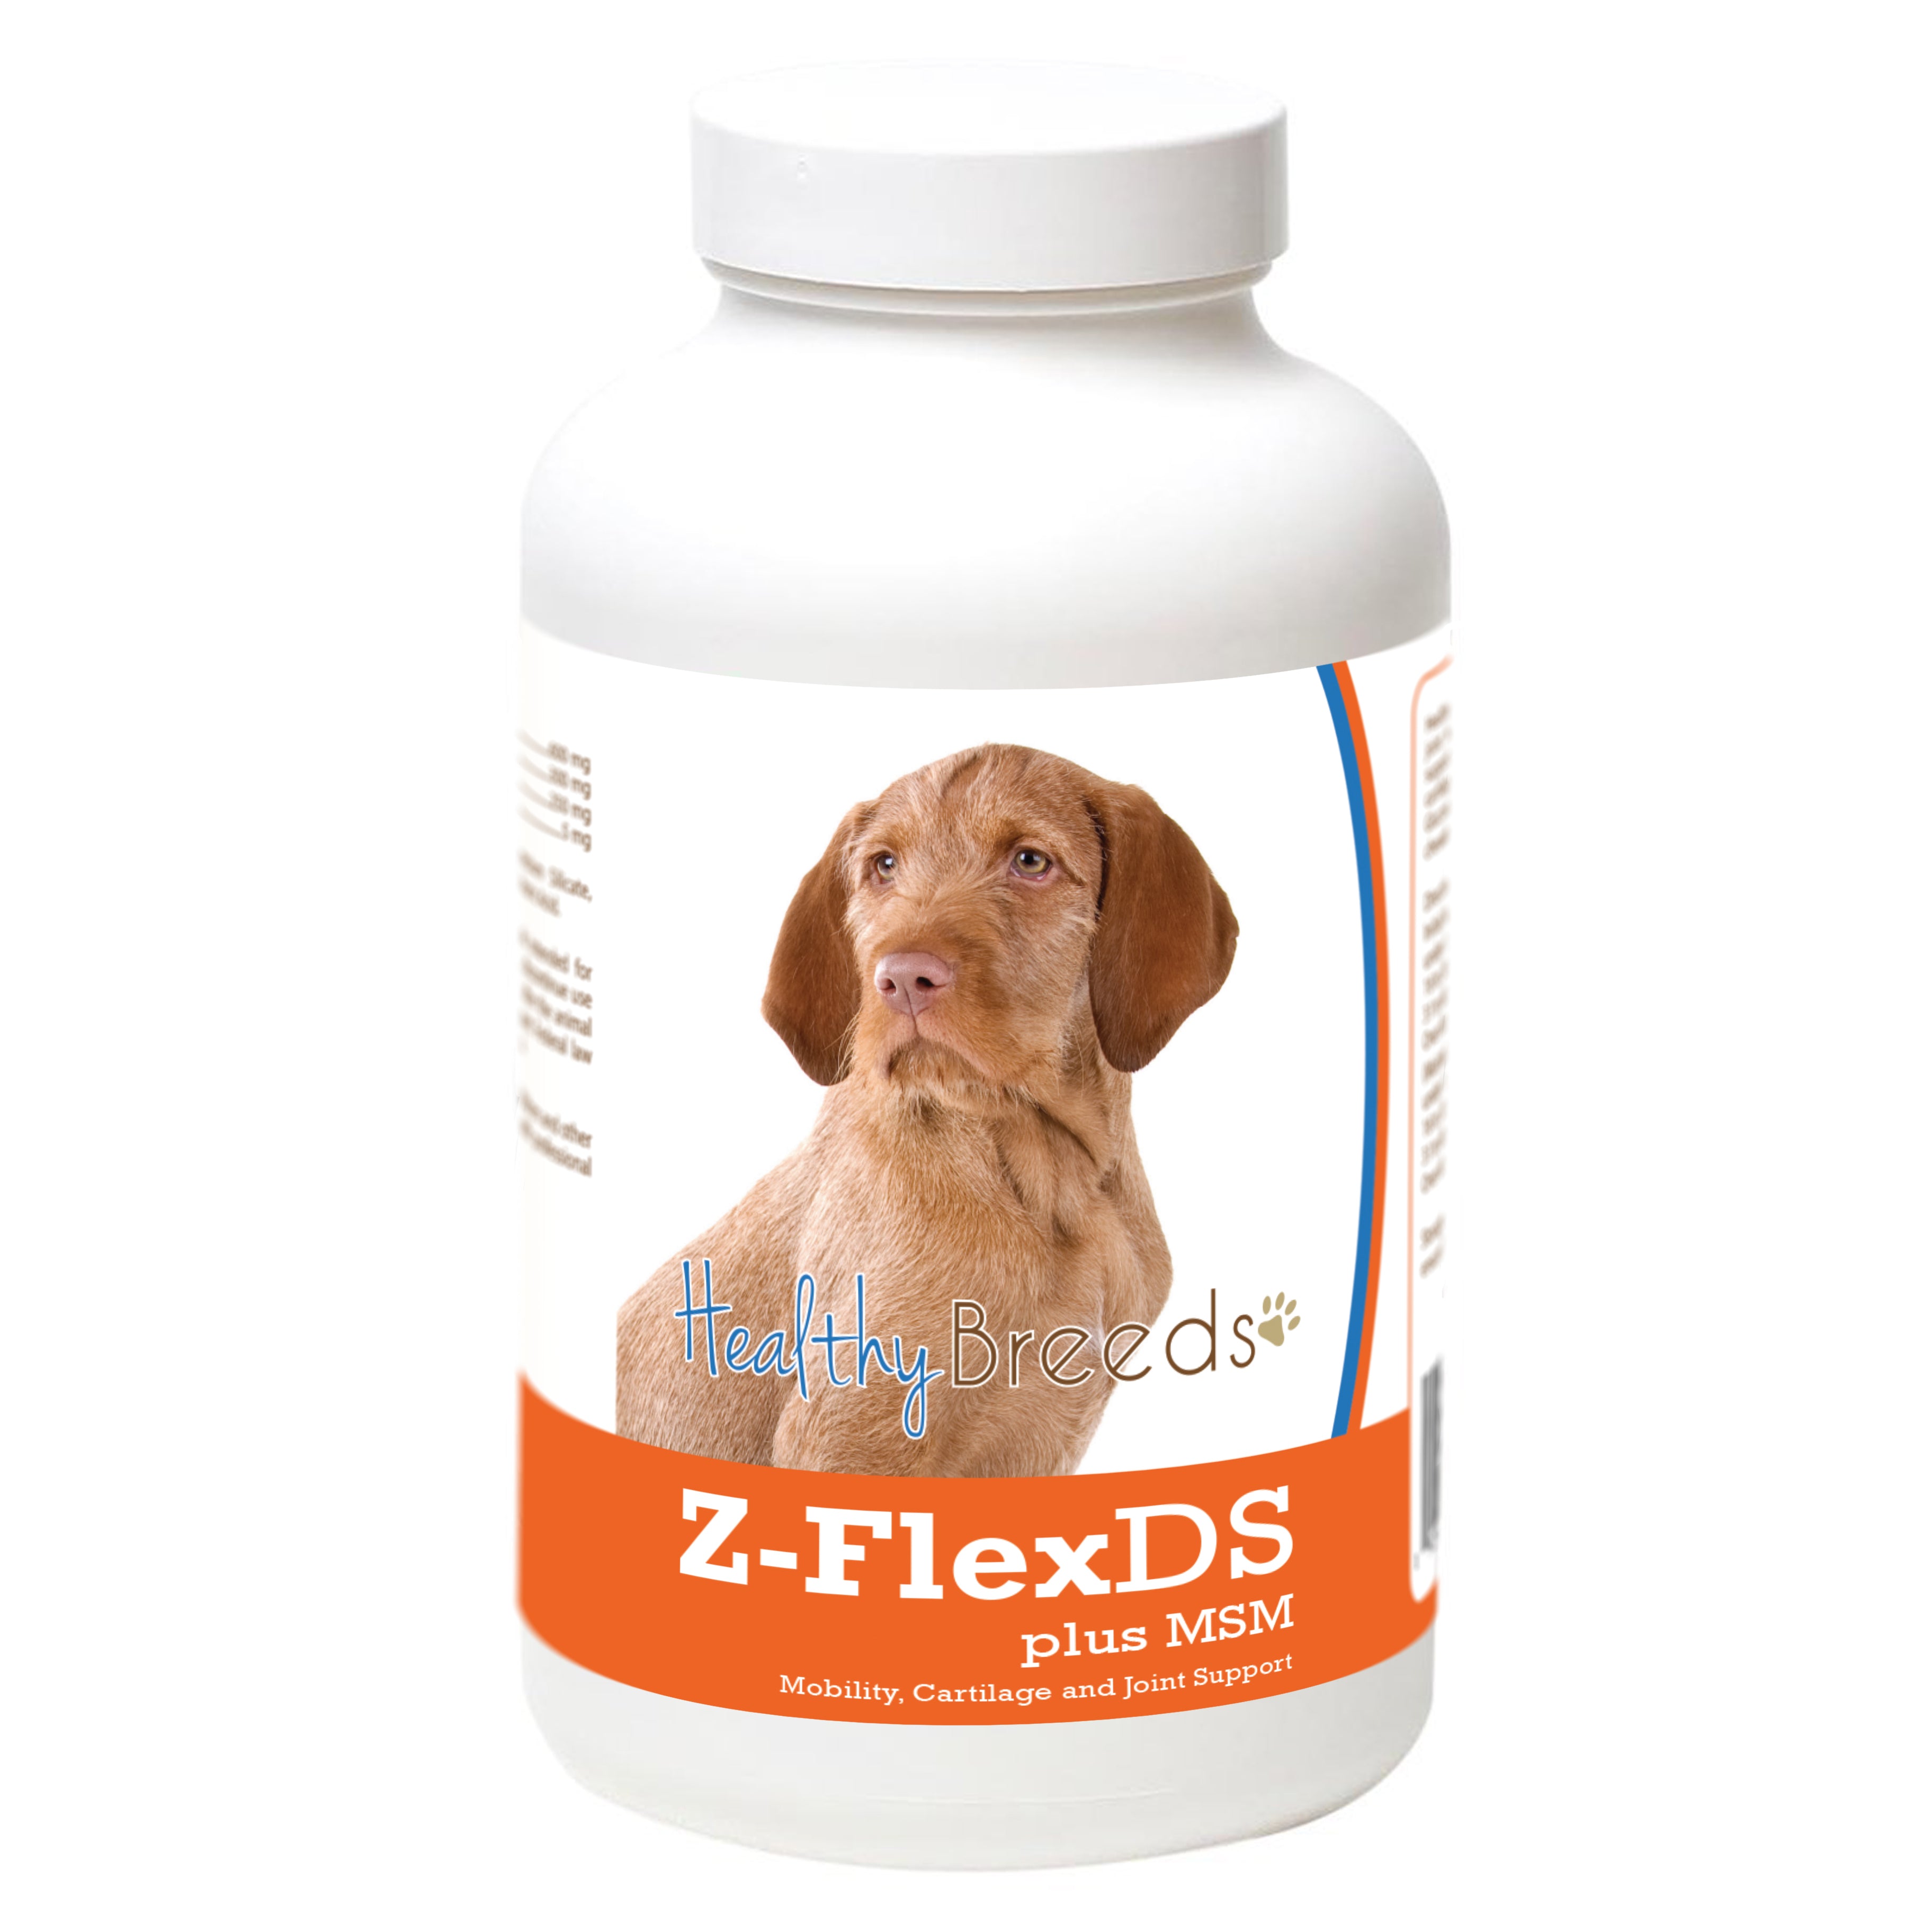 Wirehaired Vizsla Z-FlexDS plus MSM Chewable Tablets 60 Count